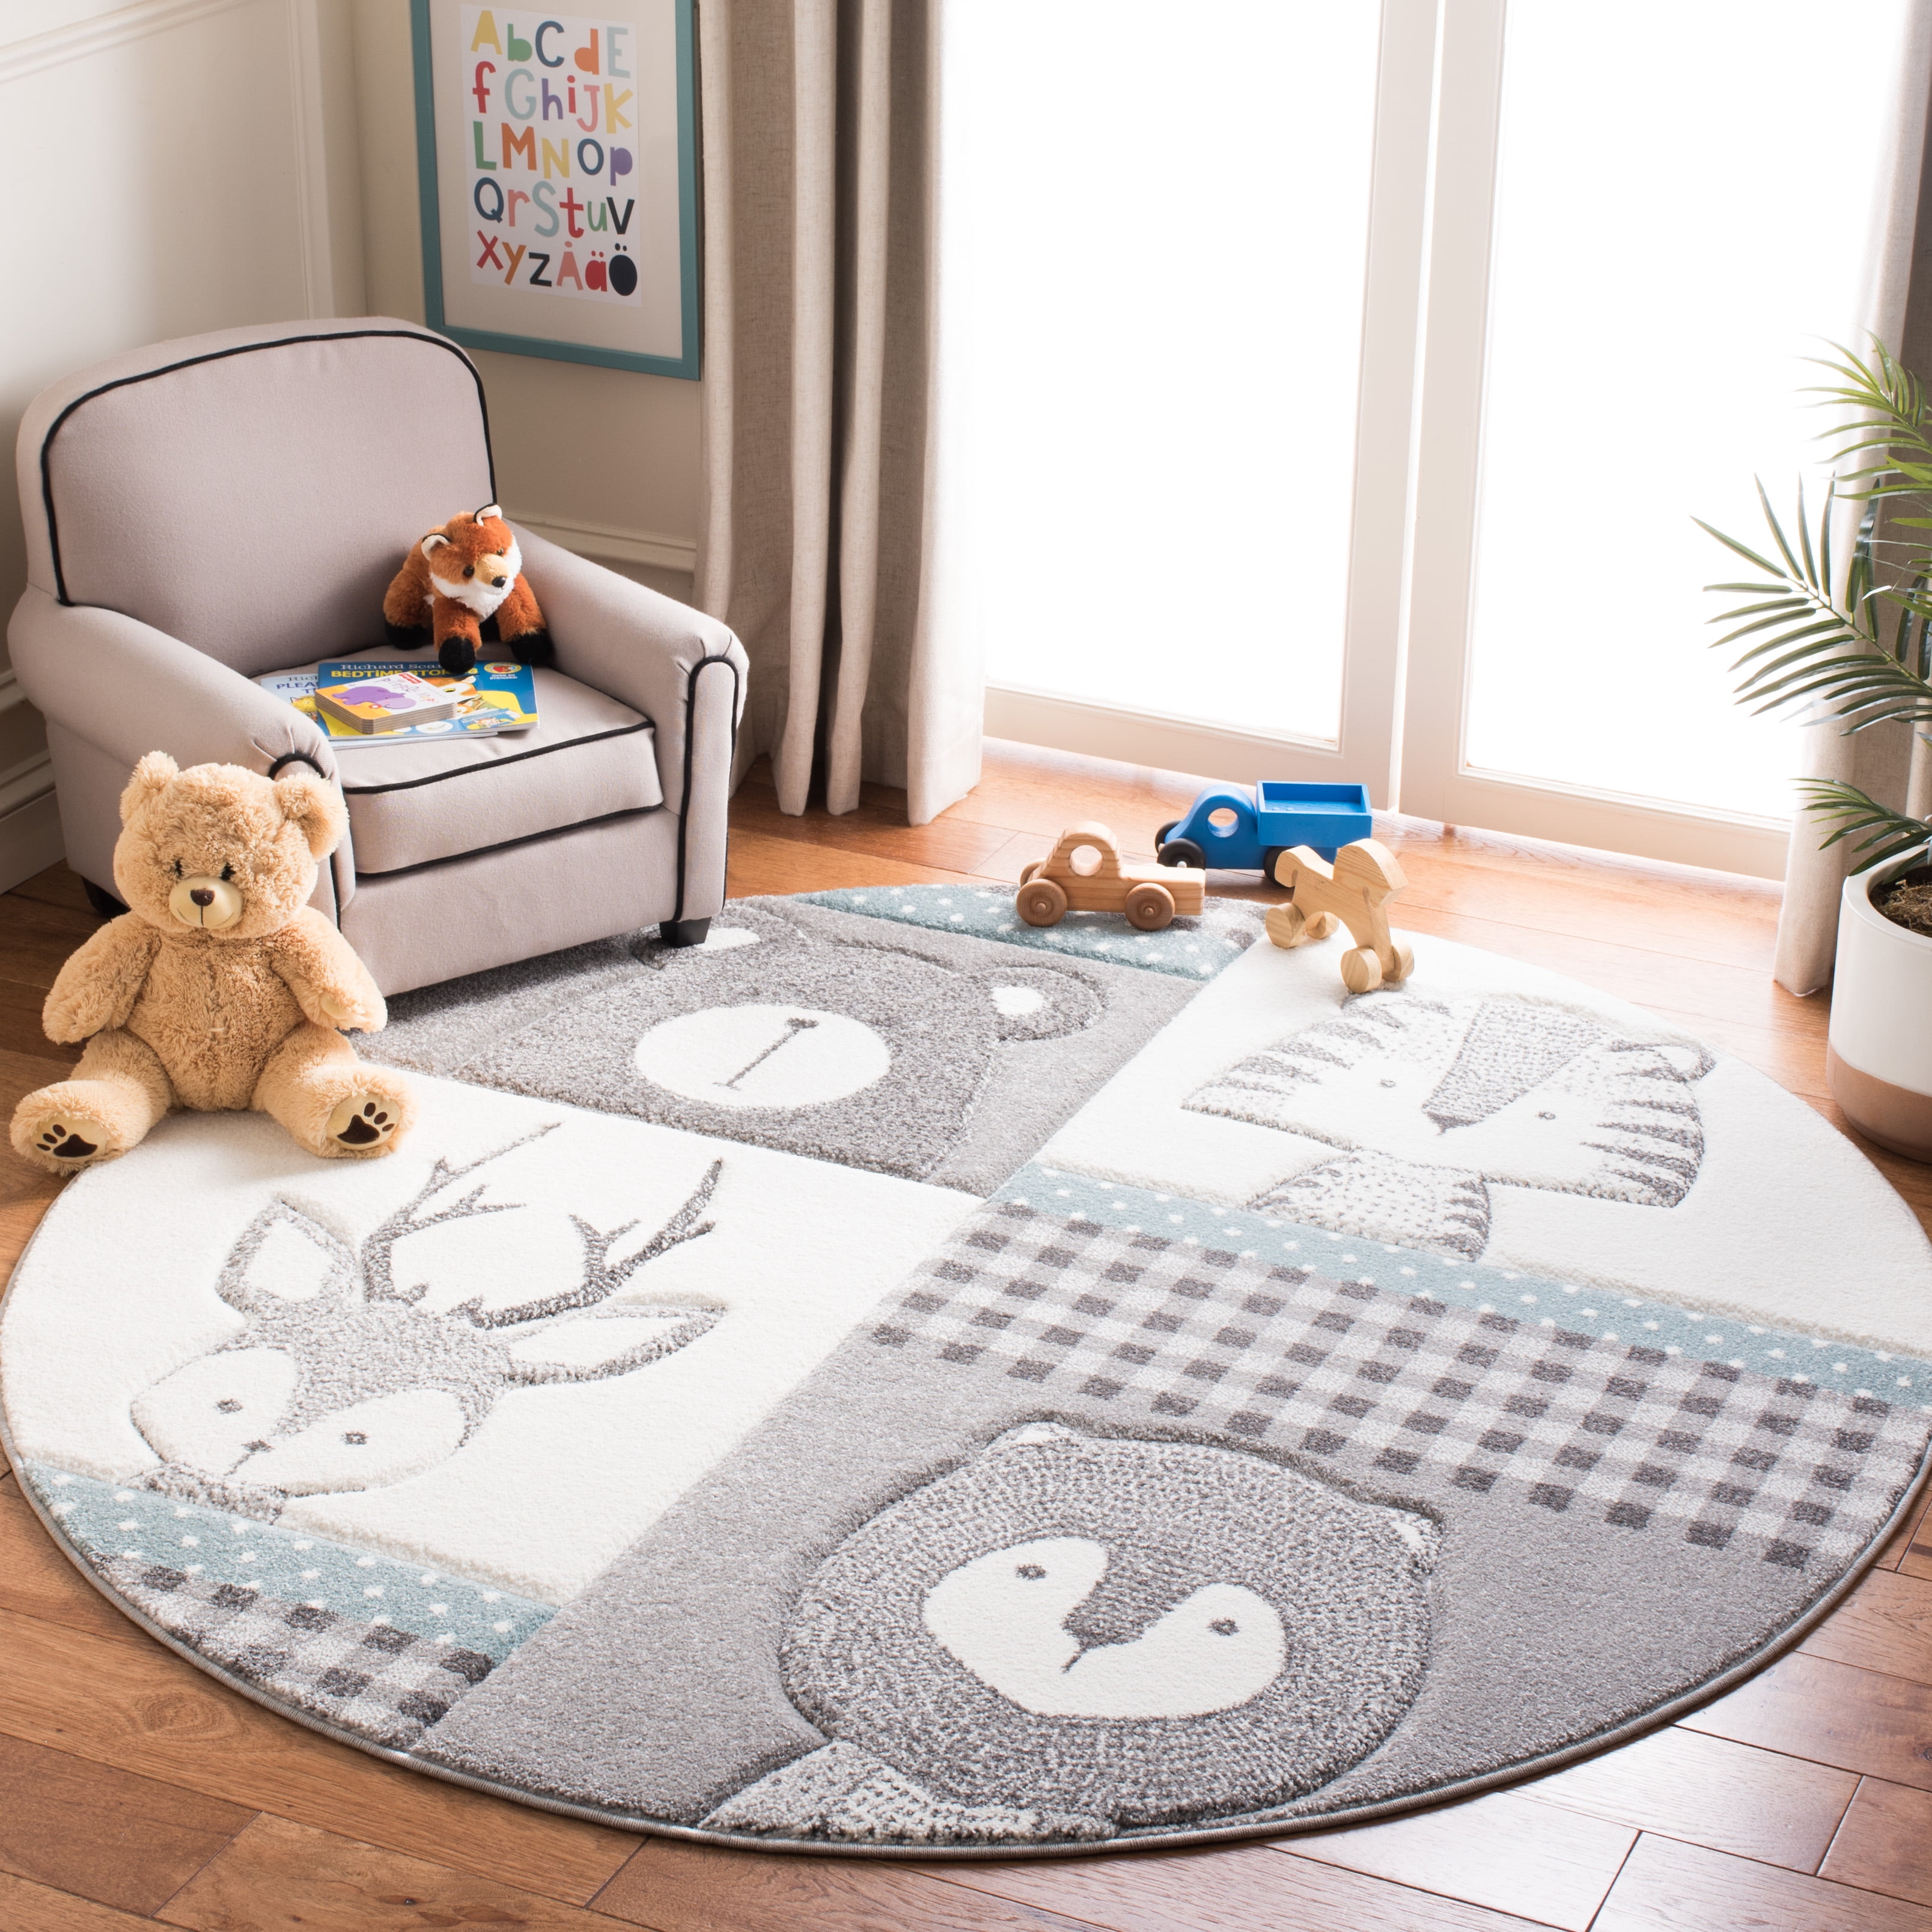 39 Kids Rug Butterfly Alphabet Educational Area Rugs for Infant Toddlers Soft Playtime Collection Learning & Game Round Carpet for Bedroom Playroom Nursery Best Shower Gift 